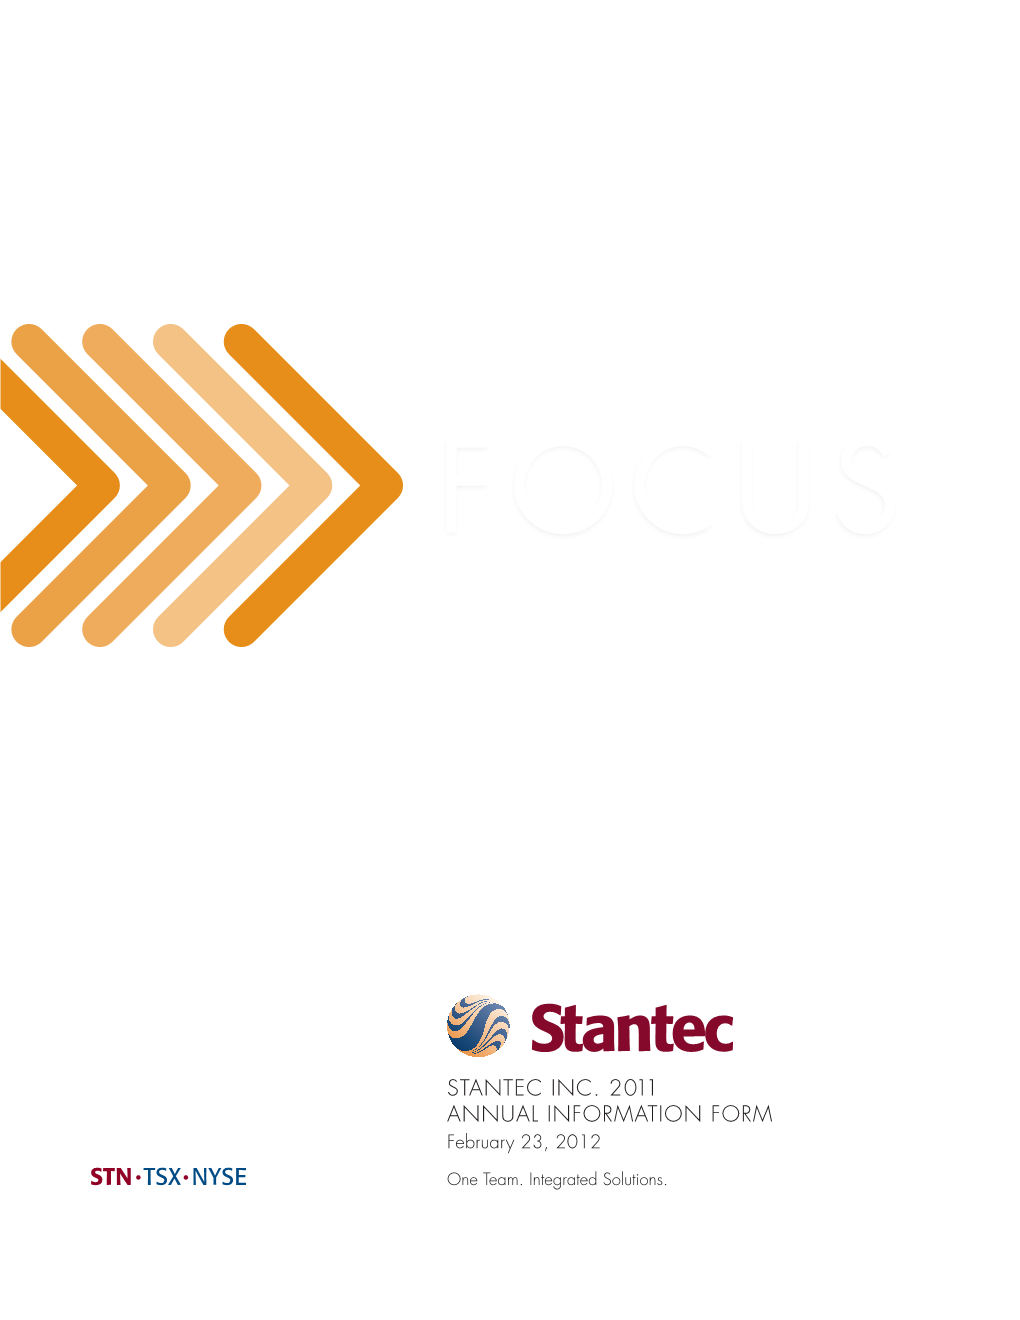 STANTEC INC. 2011 ANNUAL INFORMATION FORM February 23, 2012